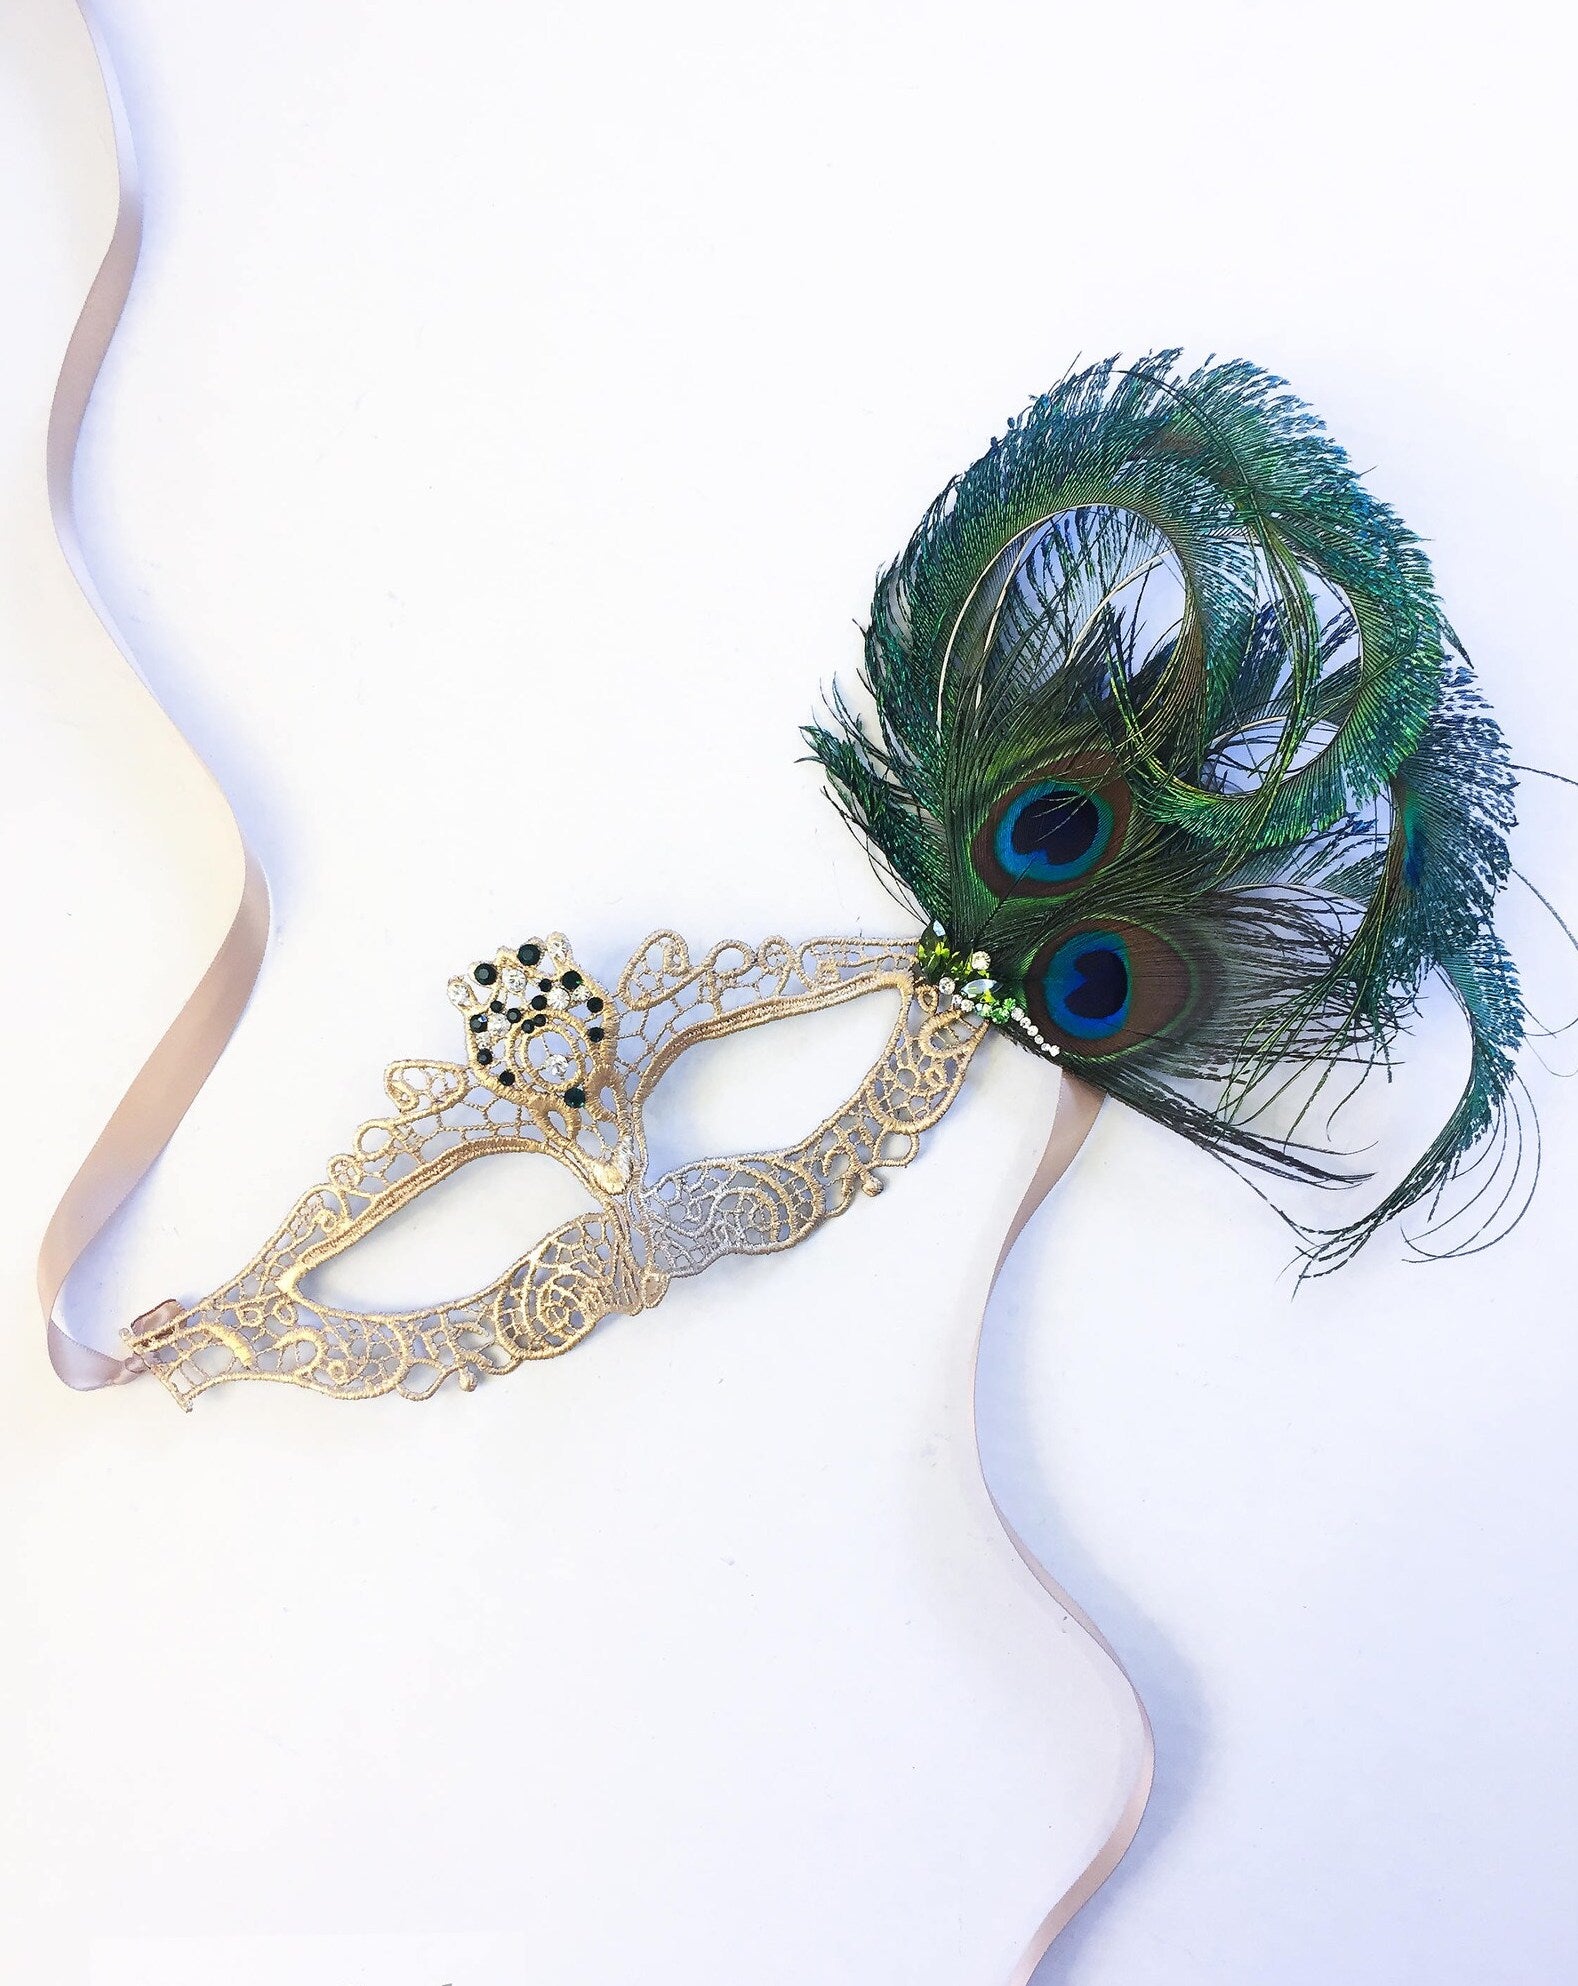 Gold lace mask with peacock feathers and green and clear rhinestones.